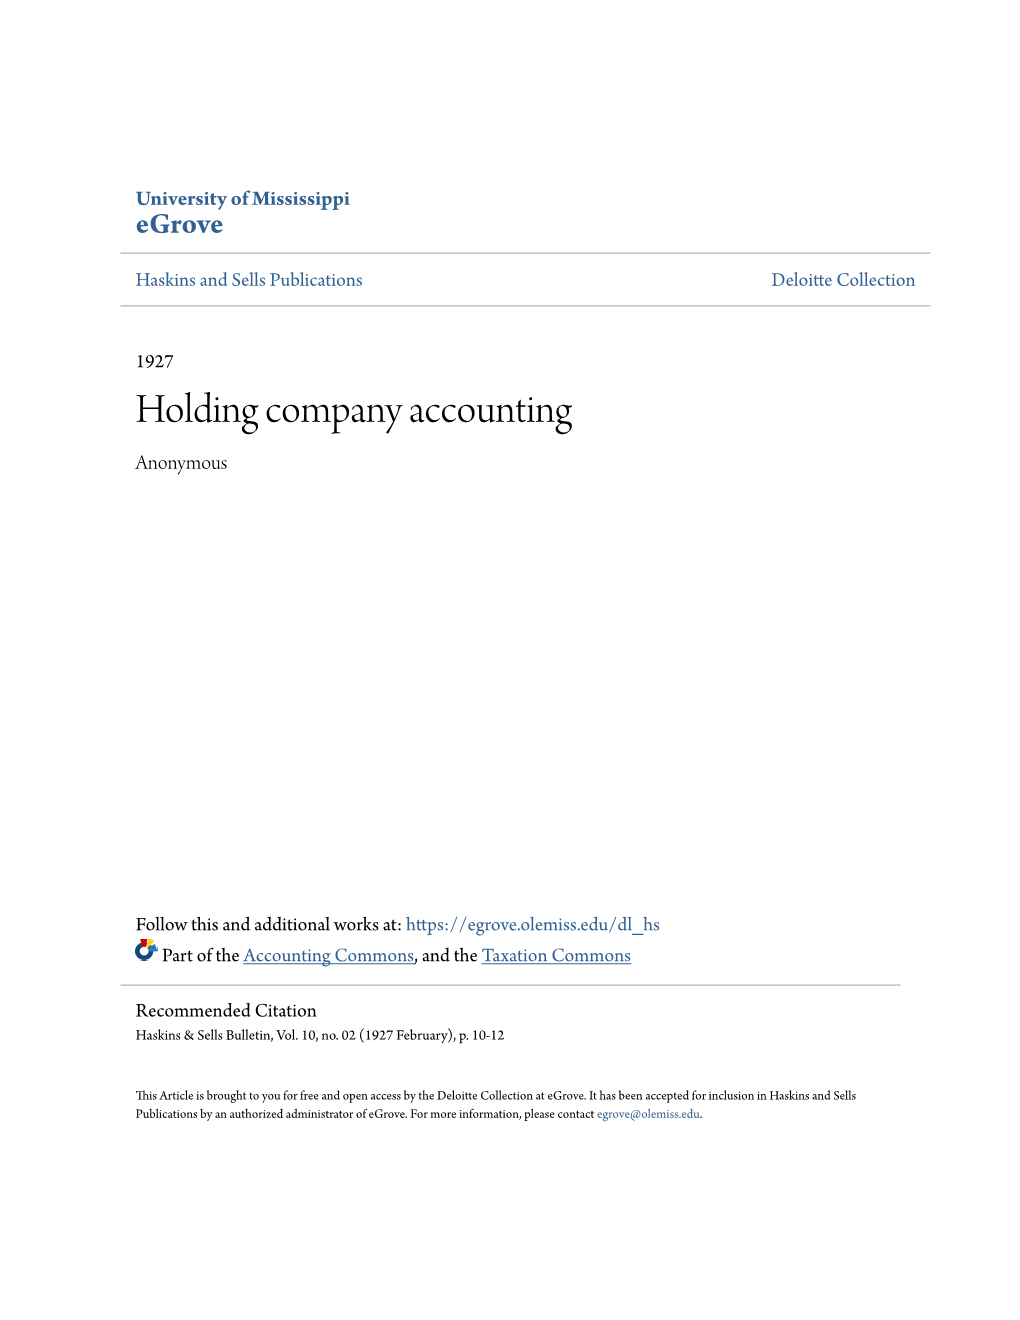 Holding Company Accounting Anonymous